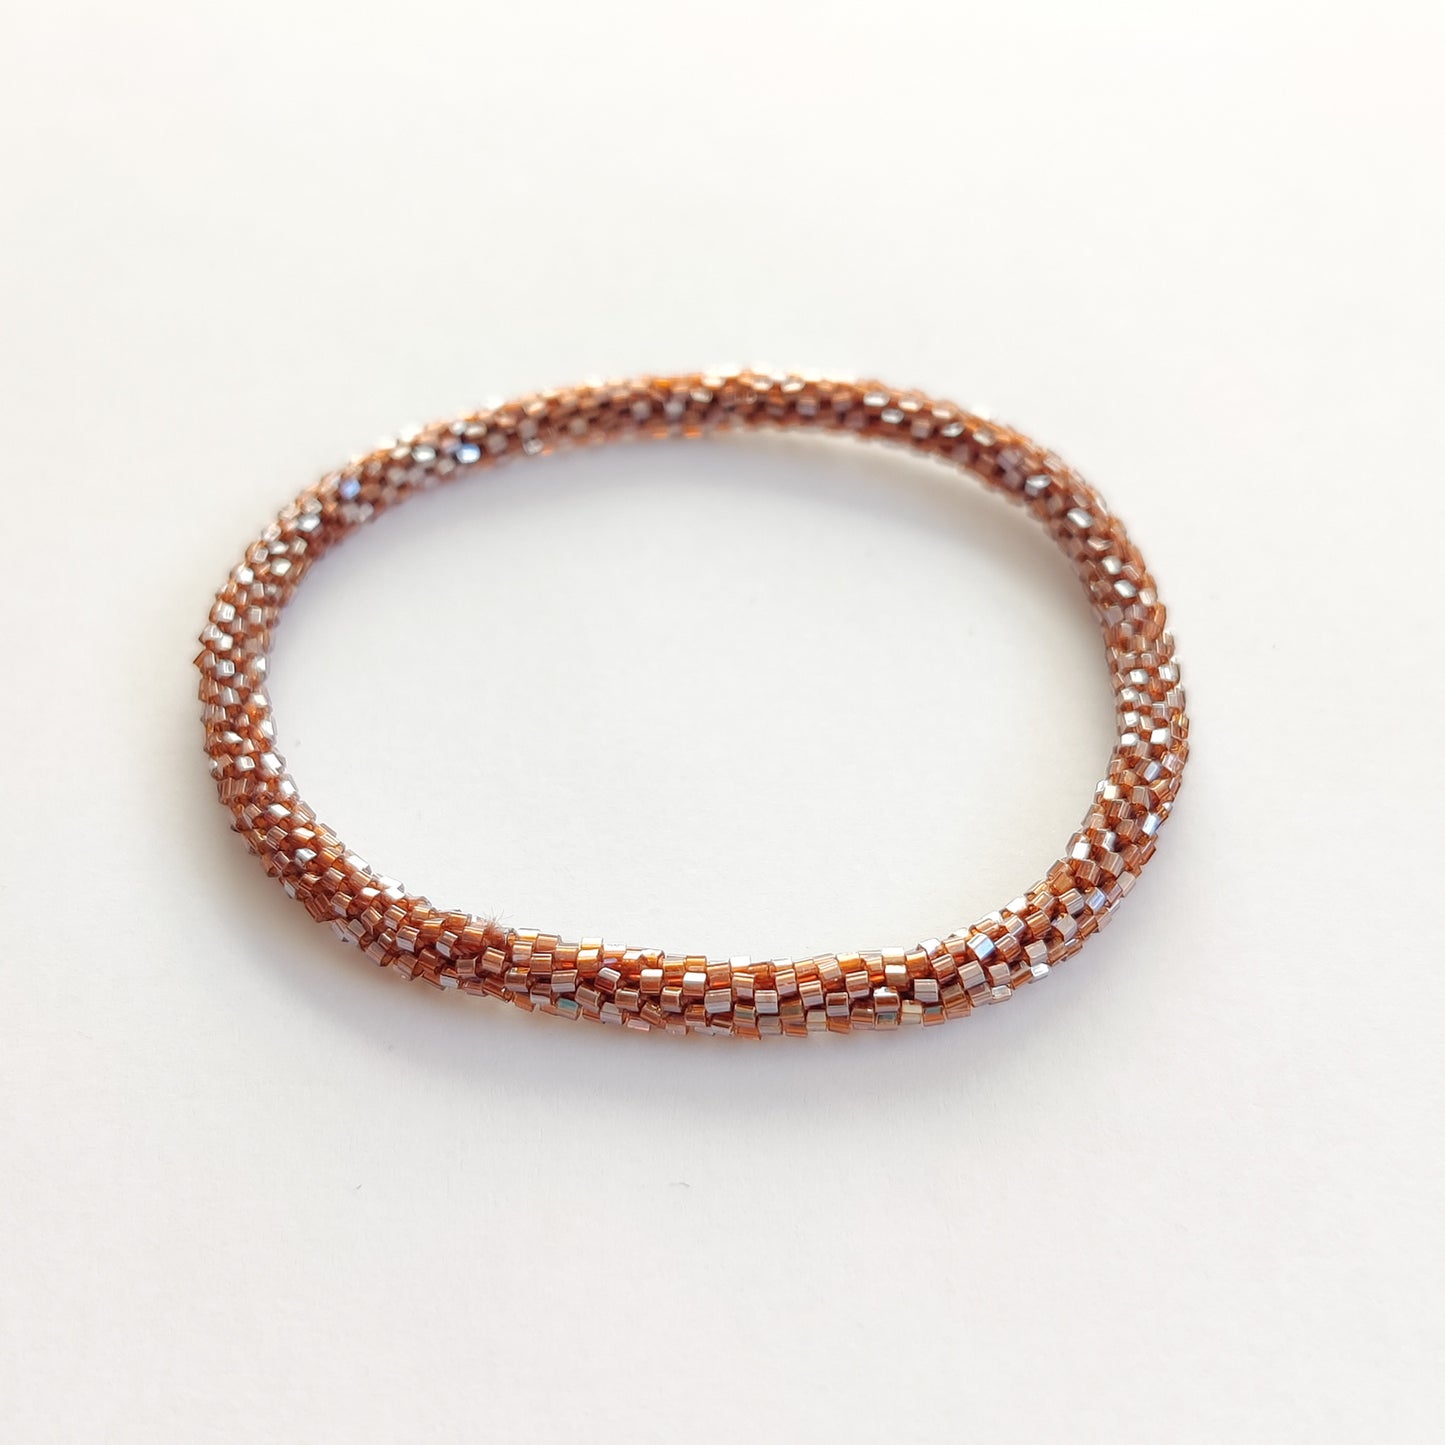 An Indian Summer Brown Ibiza Roll On Bracelet Glass Beads Arm Candy Stacking Bracelets